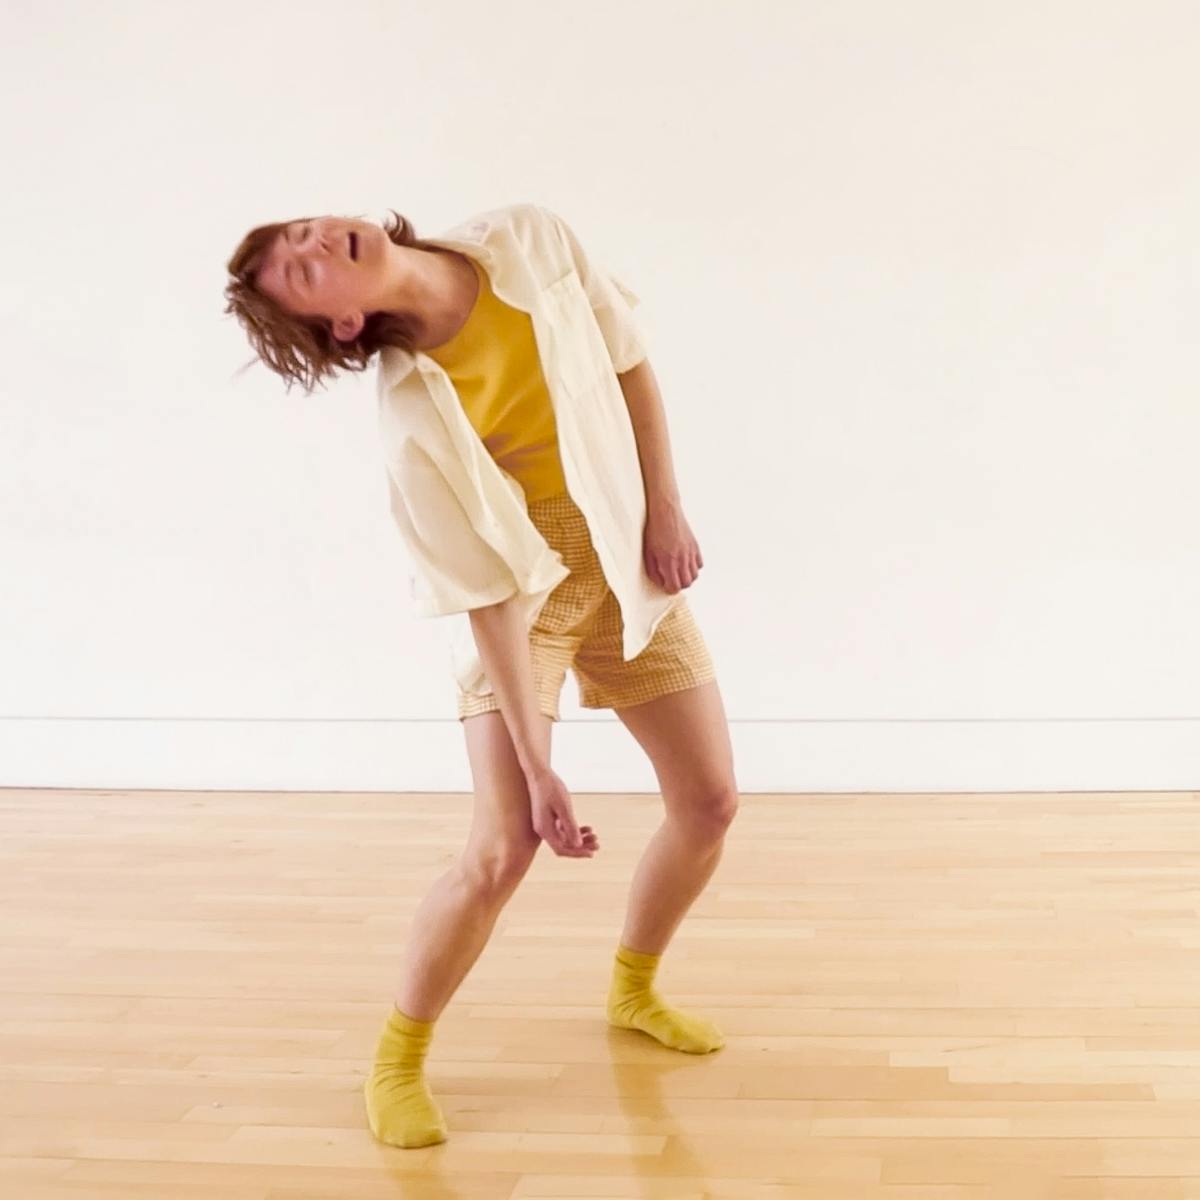 Photograph of a slim, white person in their mid twenties with short brown hair wearing yellow socks, shorts and a shirt. The figure is captured in movement, leaning to the left with bent knees and loose hanging arms. Their eyes are closed and their mouth is softly open. There is a plain white wall behind them and a smooth wooden floor beneath their feet. 